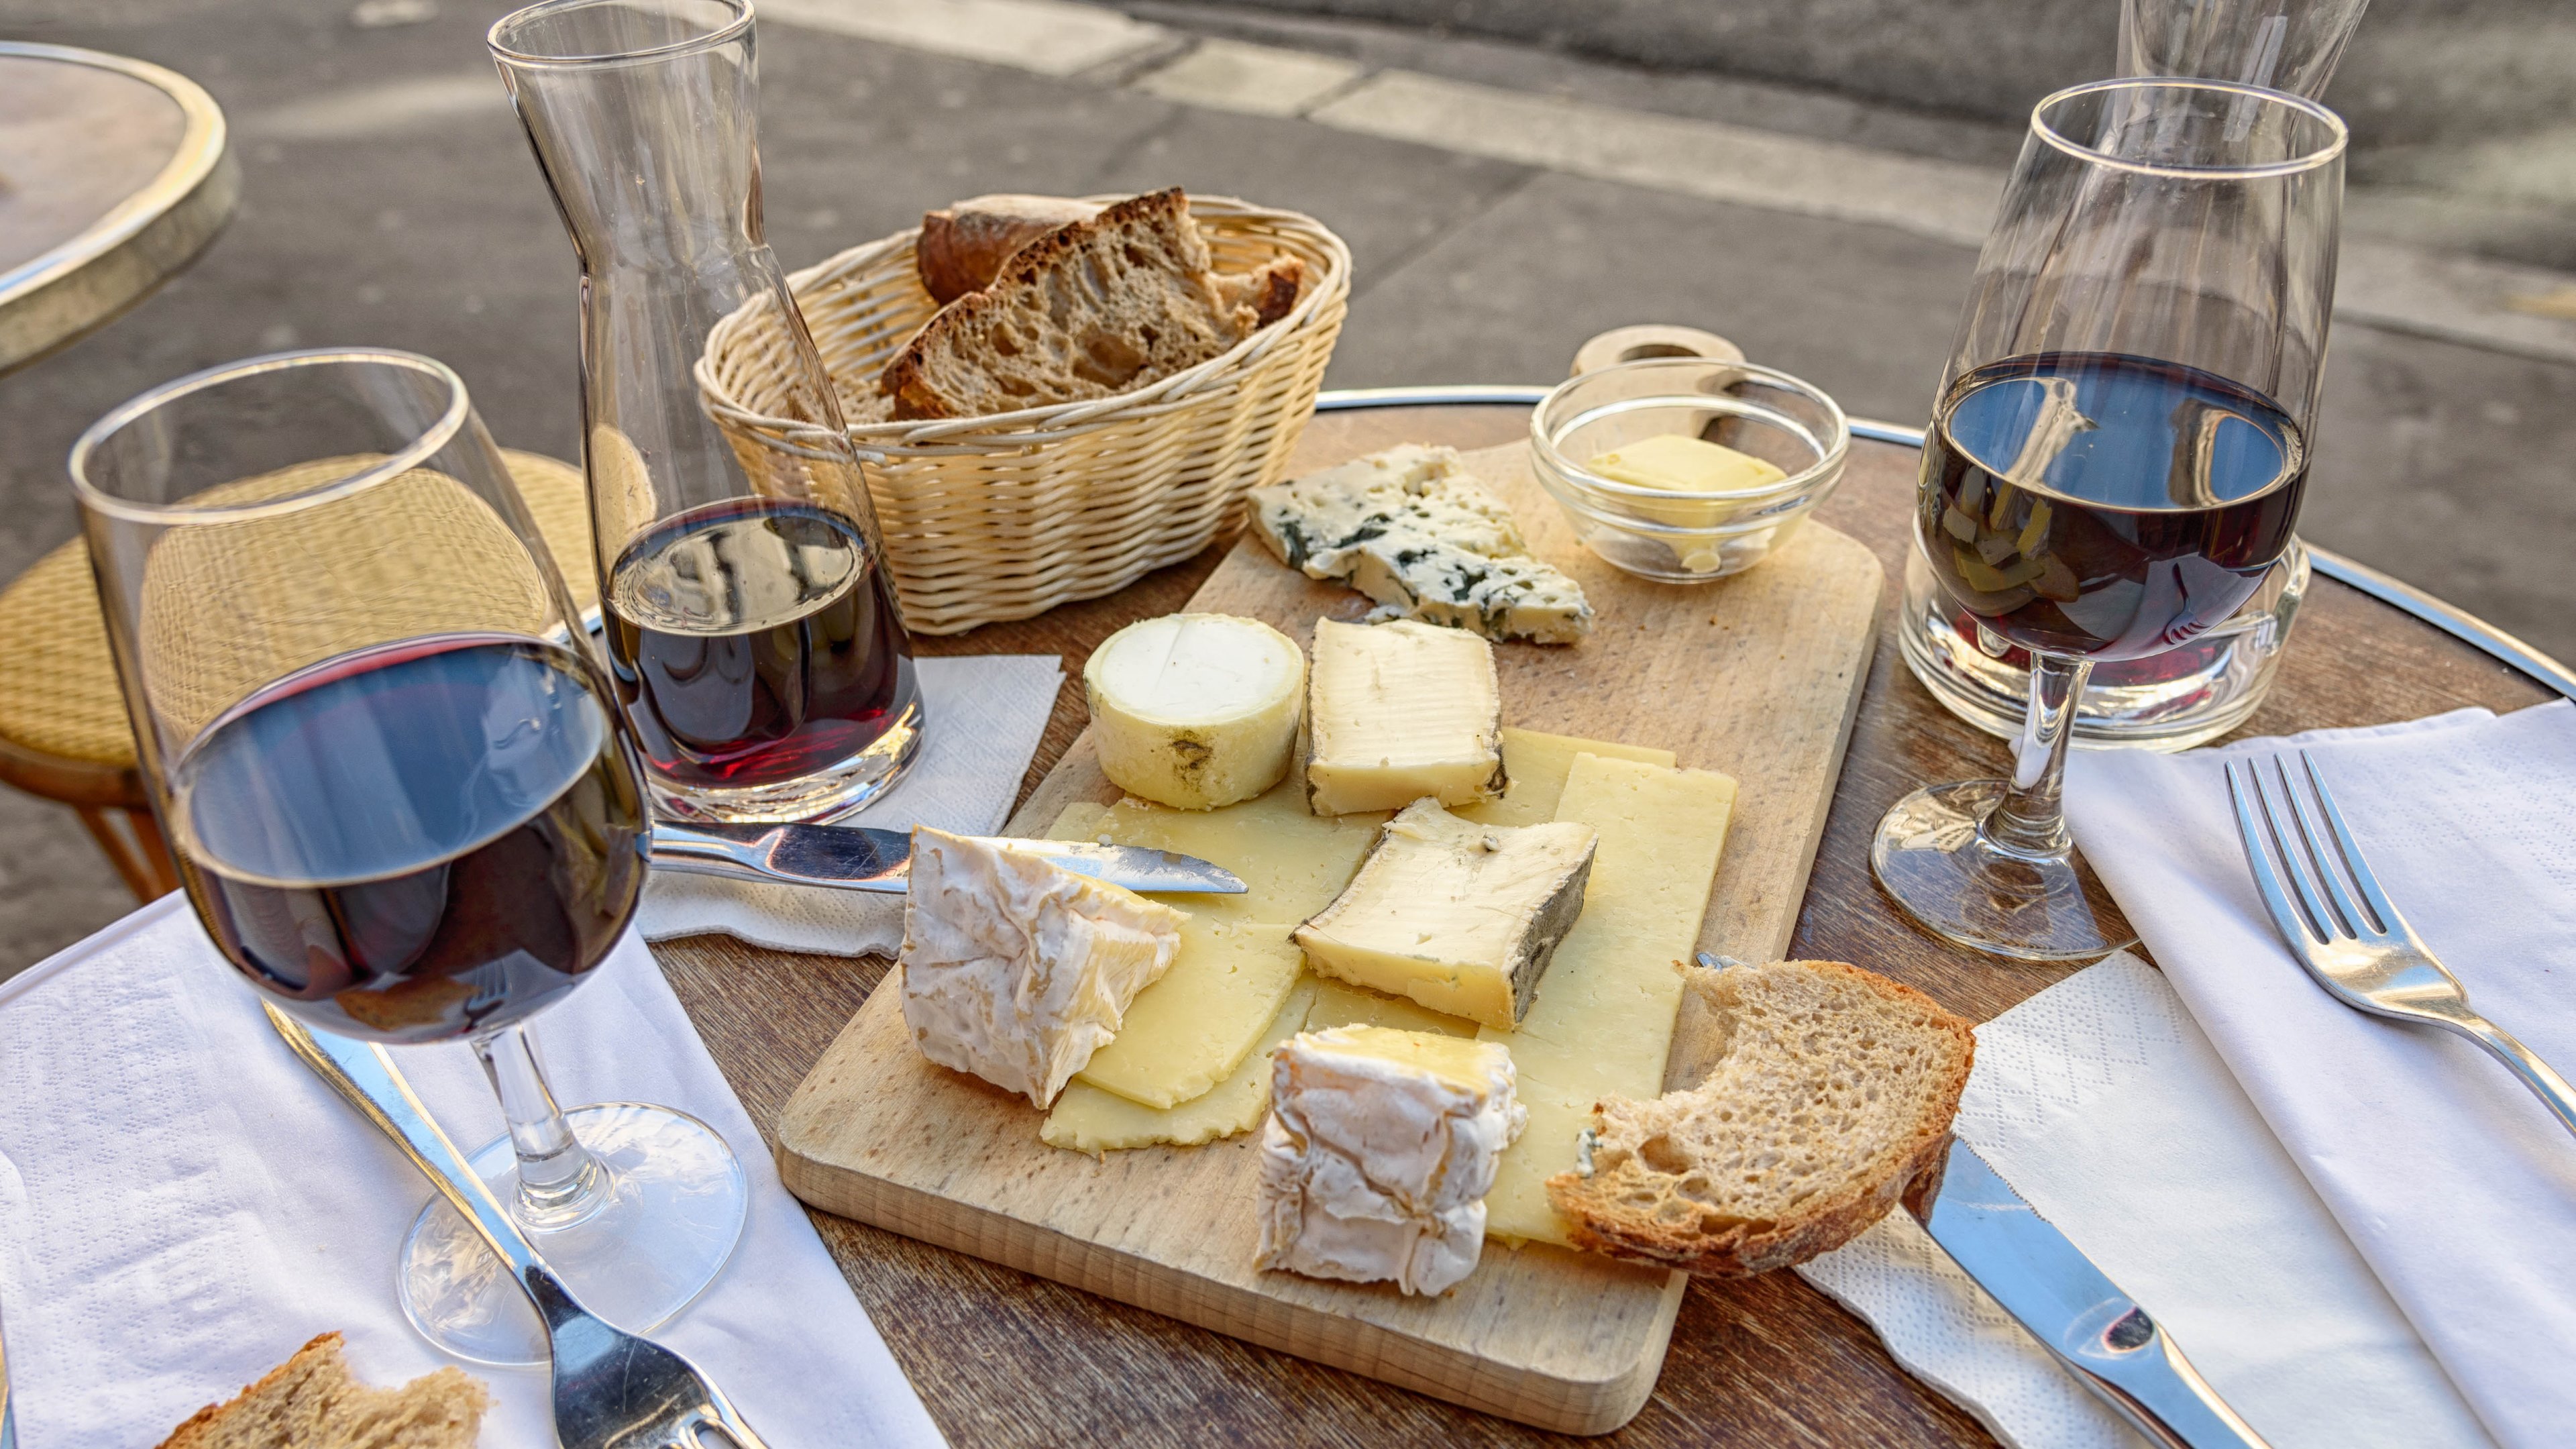 cheese, photography, still life, food, glass, table, wine